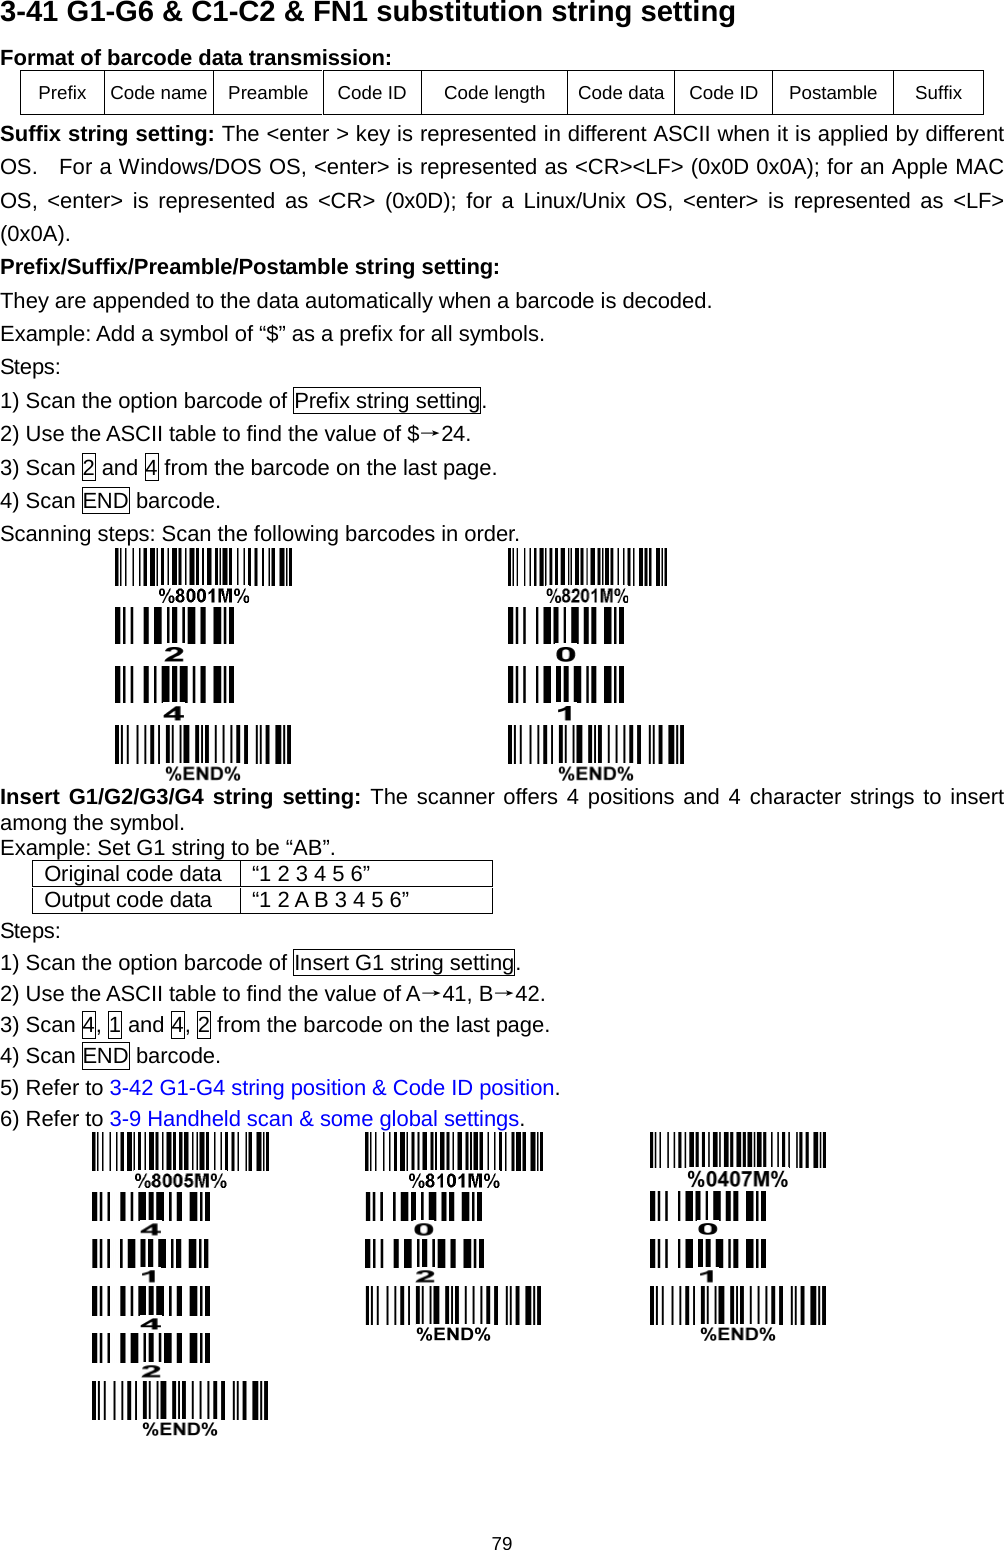 79 3-41 G1-G6 &amp; C1-C2 &amp; FN1 substitution string setting Format of barcode data transmission: Prefix  Code name  Preamble  Code ID Code length Code data Code ID Postamble Suffix Suffix string setting: The &lt;enter &gt; key is represented in different ASCII when it is applied by different OS.   For a Windows/DOS OS, &lt;enter&gt; is represented as &lt;CR&gt;&lt;LF&gt; (0x0D 0x0A); for an Apple MAC OS, &lt;enter&gt; is represented as &lt;CR&gt; (0x0D); for a Linux/Unix OS, &lt;enter&gt; is represented as &lt;LF&gt; (0x0A). Prefix/Suffix/Preamble/Postamble string setting: They are appended to the data automatically when a barcode is decoded. Example: Add a symbol of “$” as a prefix for all symbols. Steps: 1) Scan the option barcode of Prefix string setting. 2) Use the ASCII table to find the value of $→24. 3) Scan 2 and 4 from the barcode on the last page. 4) Scan END barcode. Scanning steps: Scan the following barcodes in order.         Insert G1/G2/G3/G4 string setting: The scanner offers 4 positions and 4 character strings to insert among the symbol. Example: Set G1 string to be “AB”. Original code data “1 2 3 4 5 6” Output code data “1 2 A B 3 4 5 6” Steps: 1) Scan the option barcode of Insert G1 string setting. 2) Use the ASCII table to find the value of A→41, B→42. 3) Scan 4, 1 and 4, 2 from the barcode on the last page. 4) Scan END barcode. 5) Refer to 3-42 G1-G4 string position &amp; Code ID position. 6) Refer to 3-9 Handheld scan &amp; some global settings.               